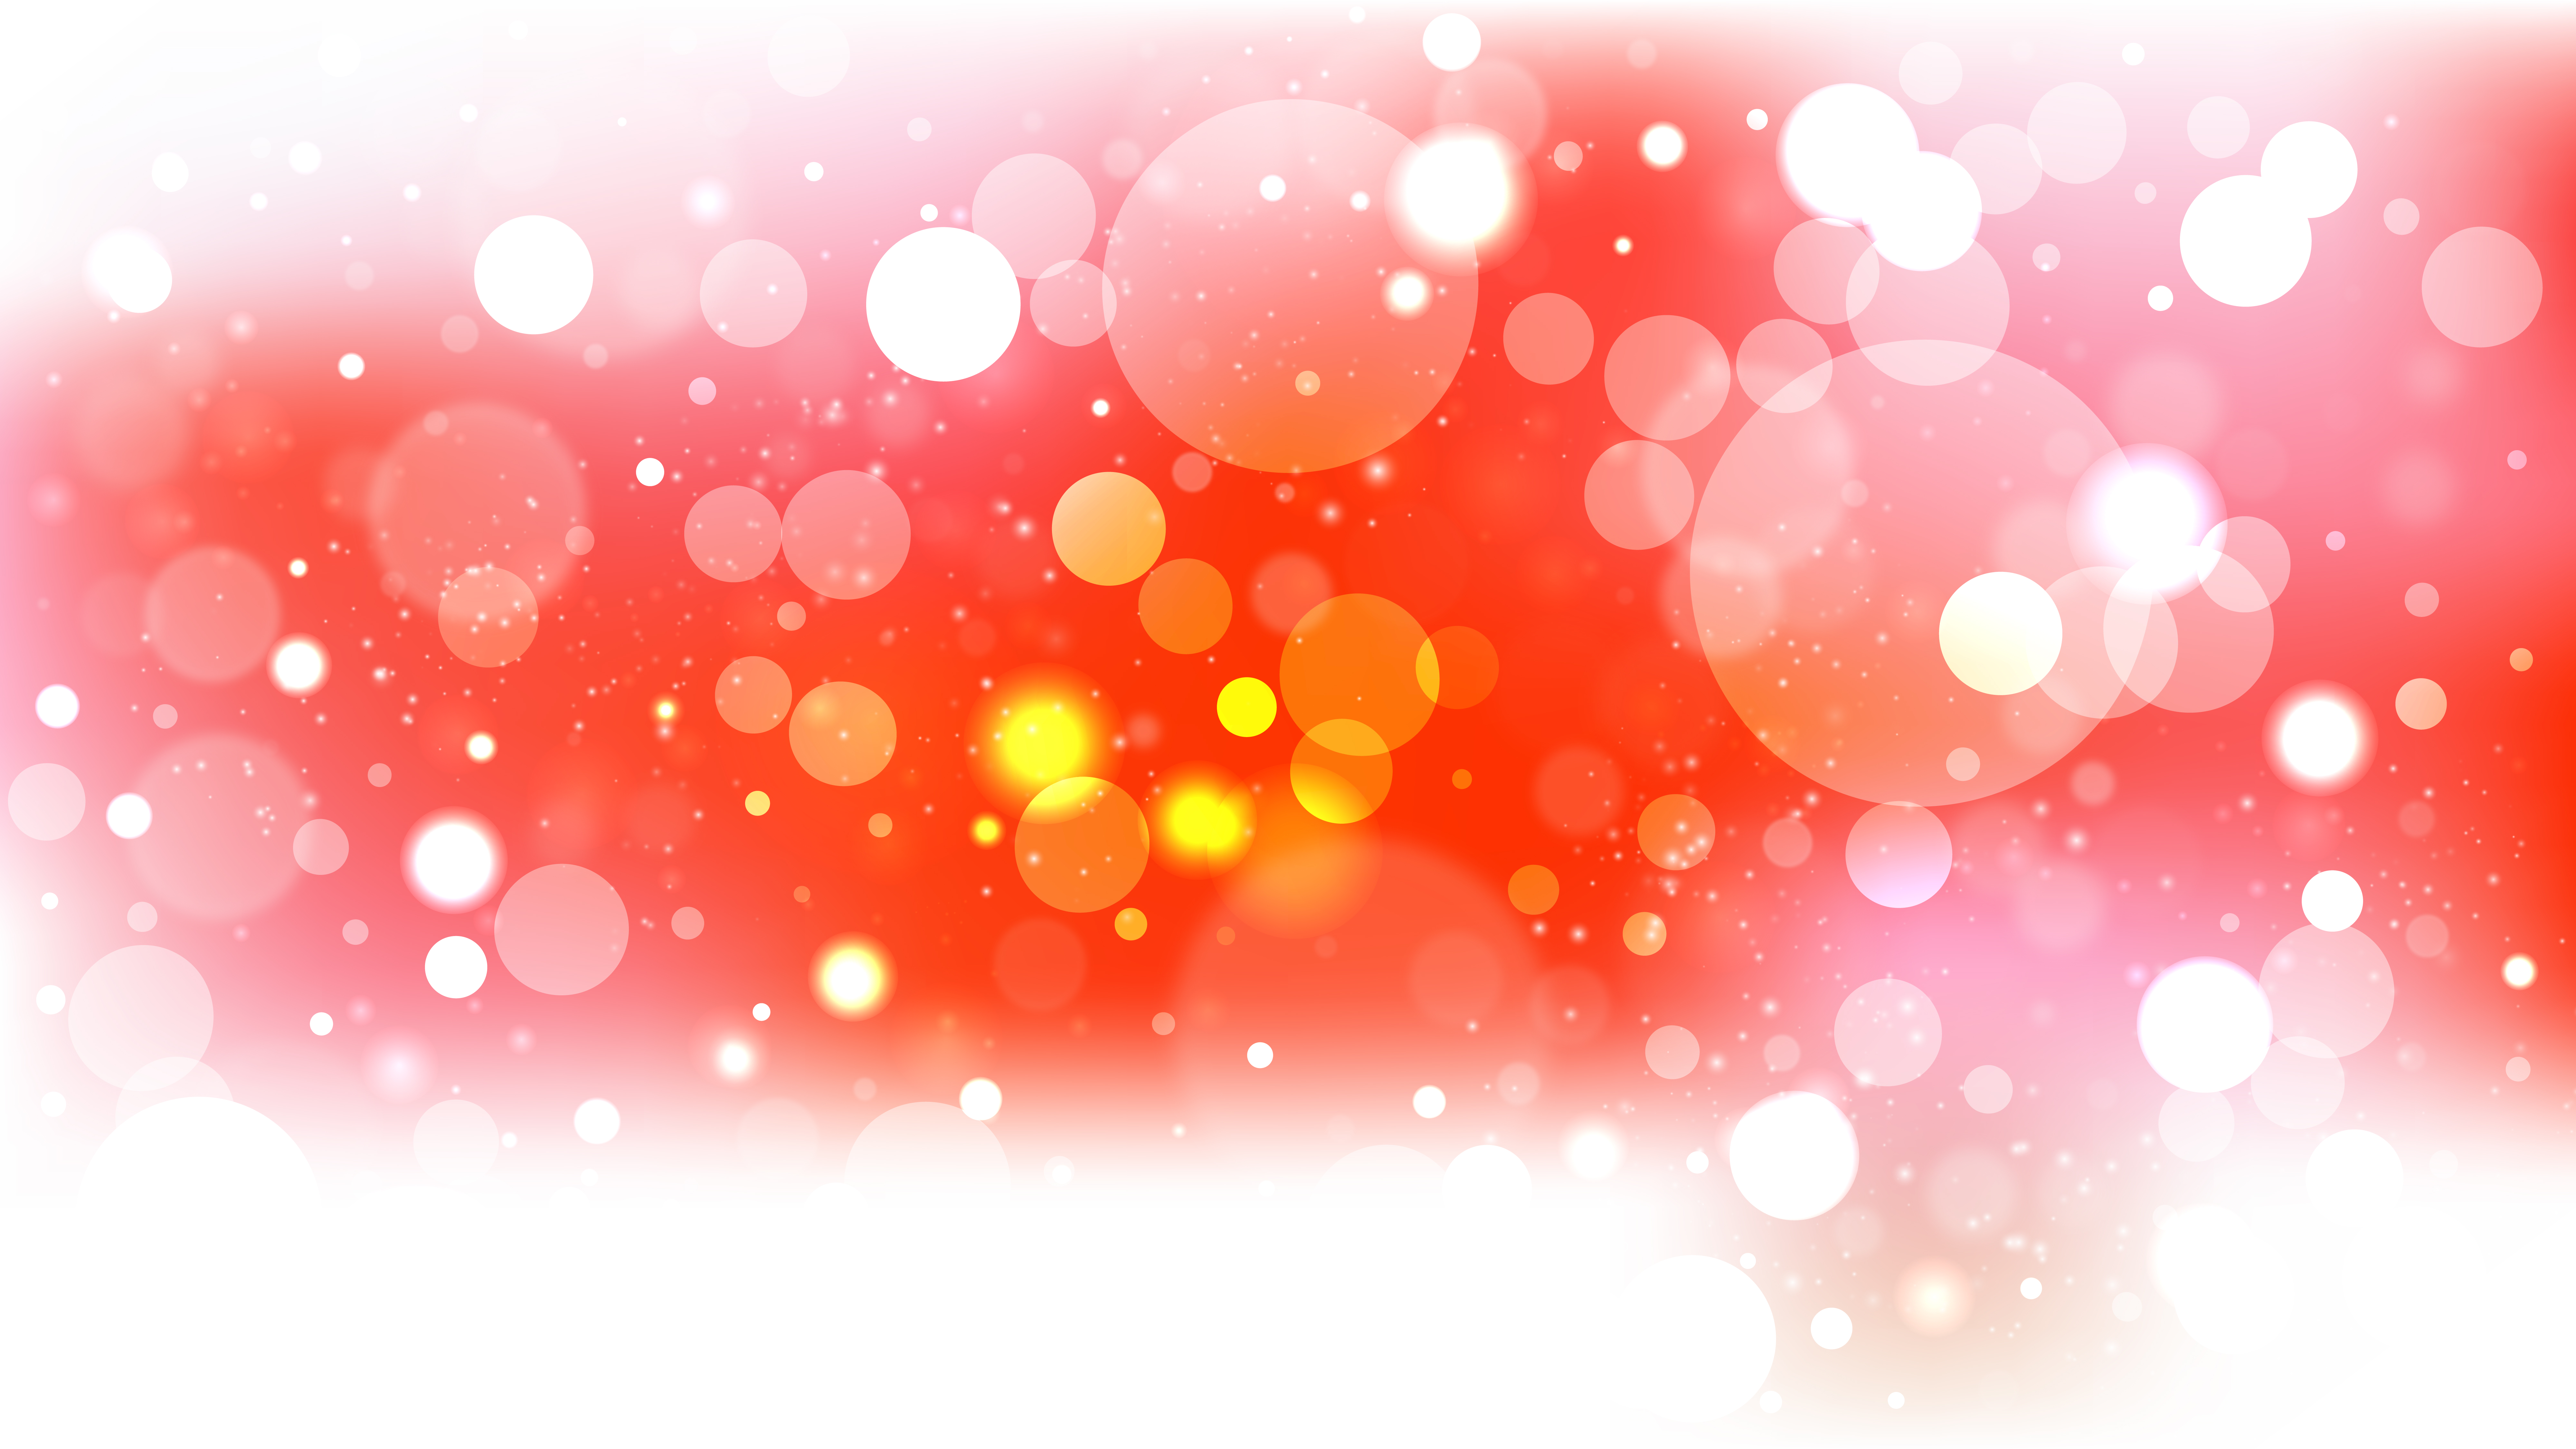 Free Red and White Lights Background Vector Art